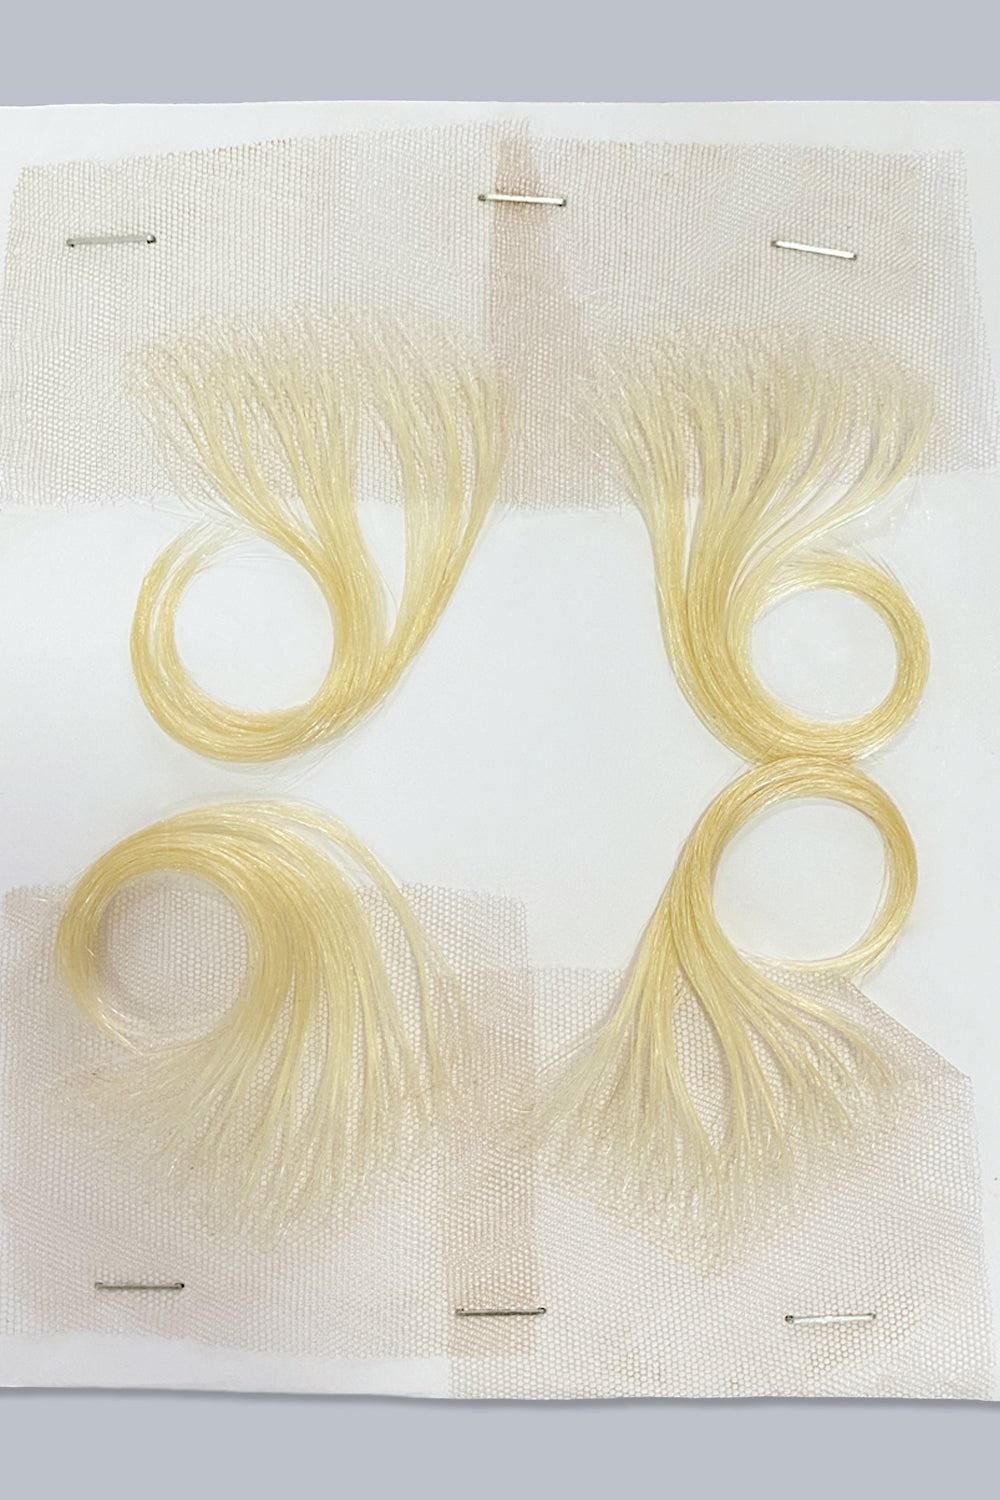 HD lace Instant Fake Baby Hair Edges Control Blonde 613 Reusable